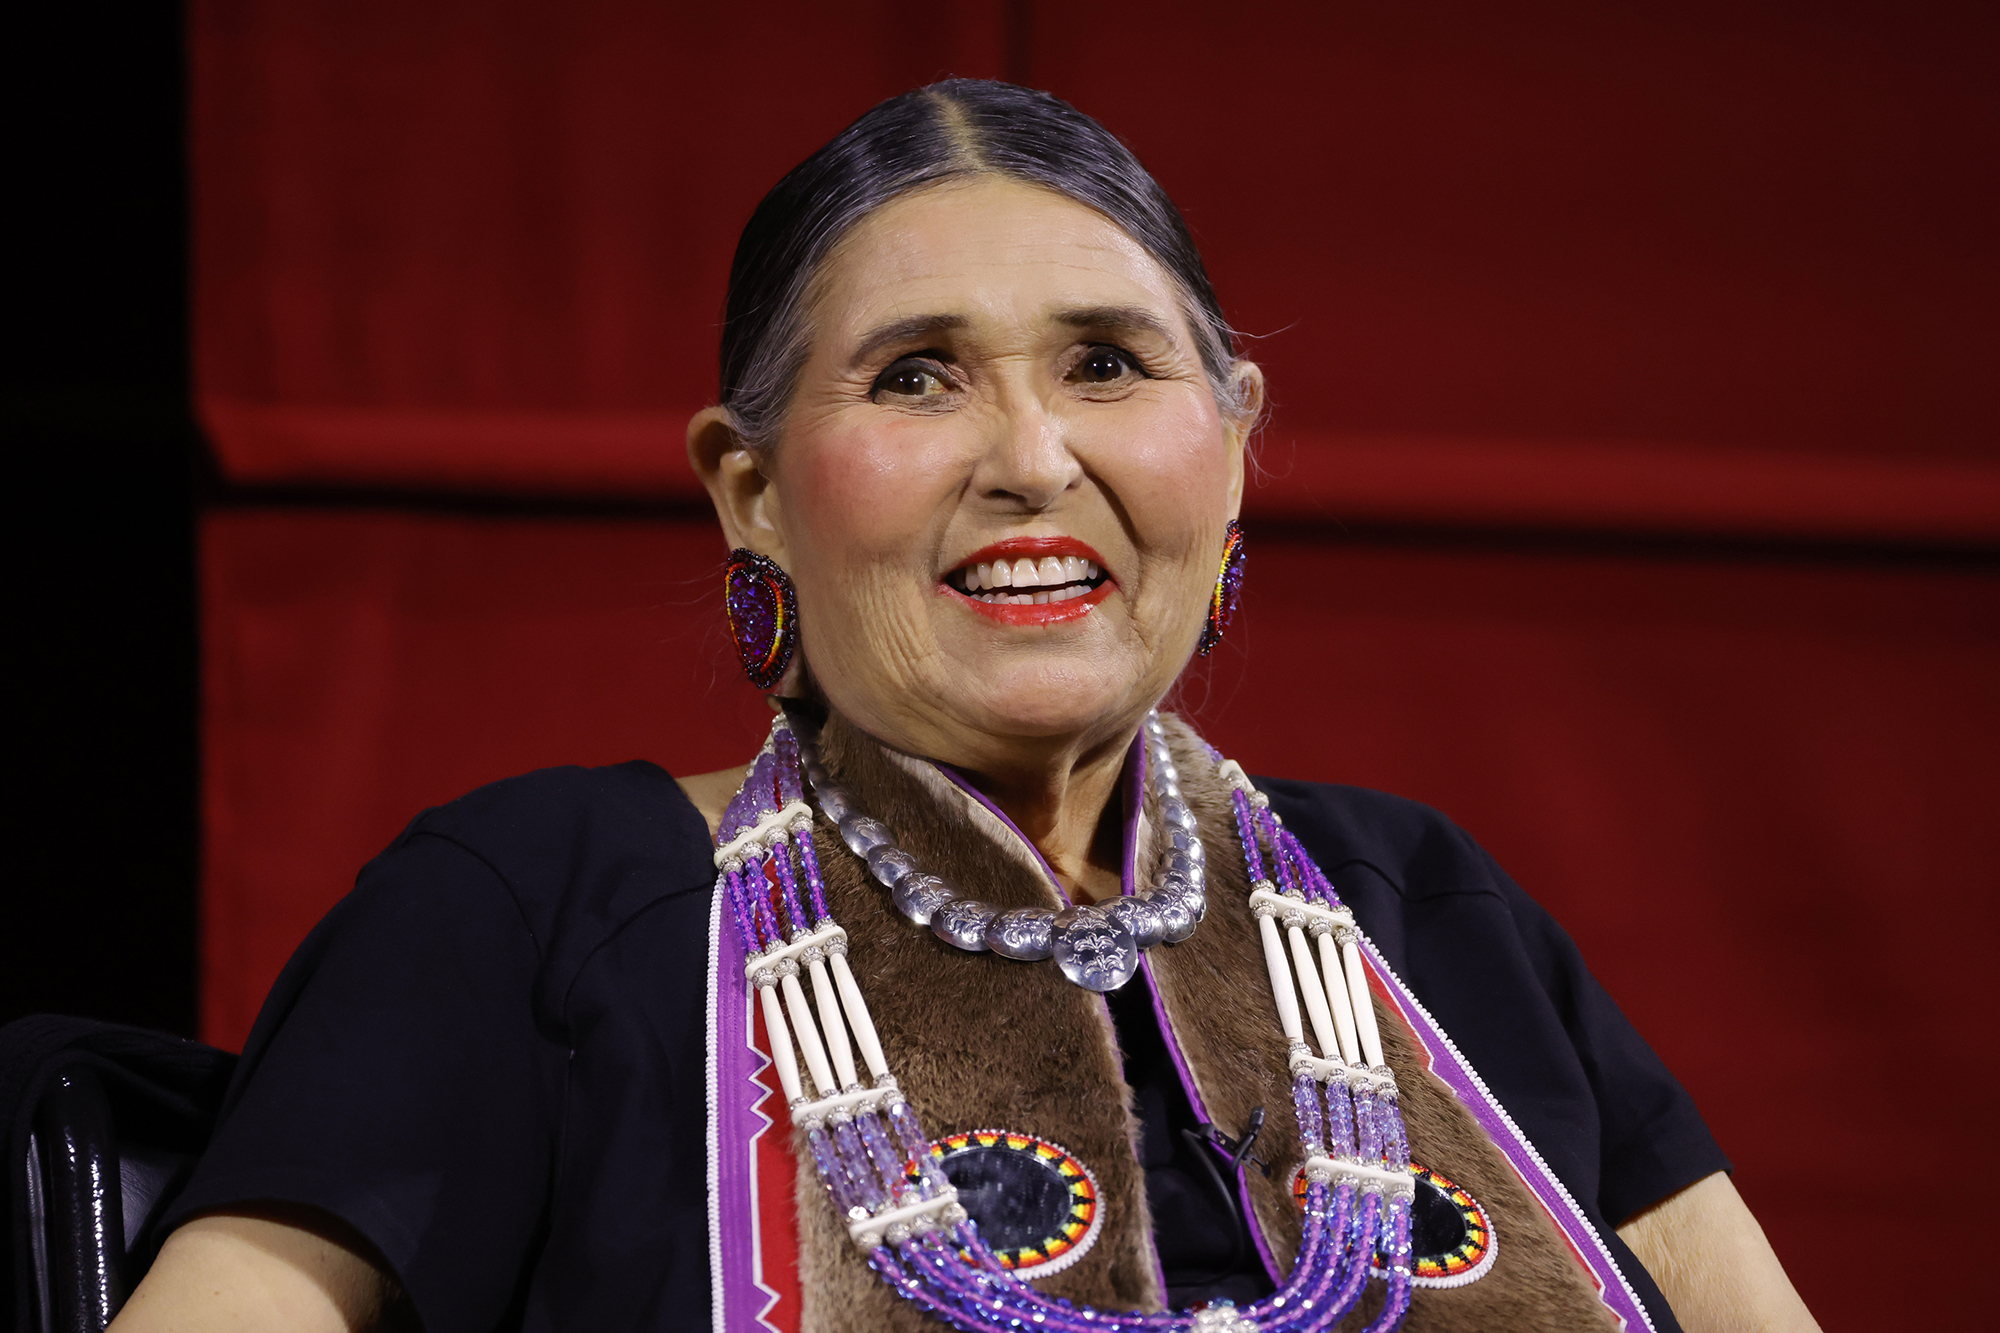 LOS ANGELES, CALIFORNIA - SEPTEMBER 17: Sacheen Littlefeather on stage at AMPAS Presents An Evening...